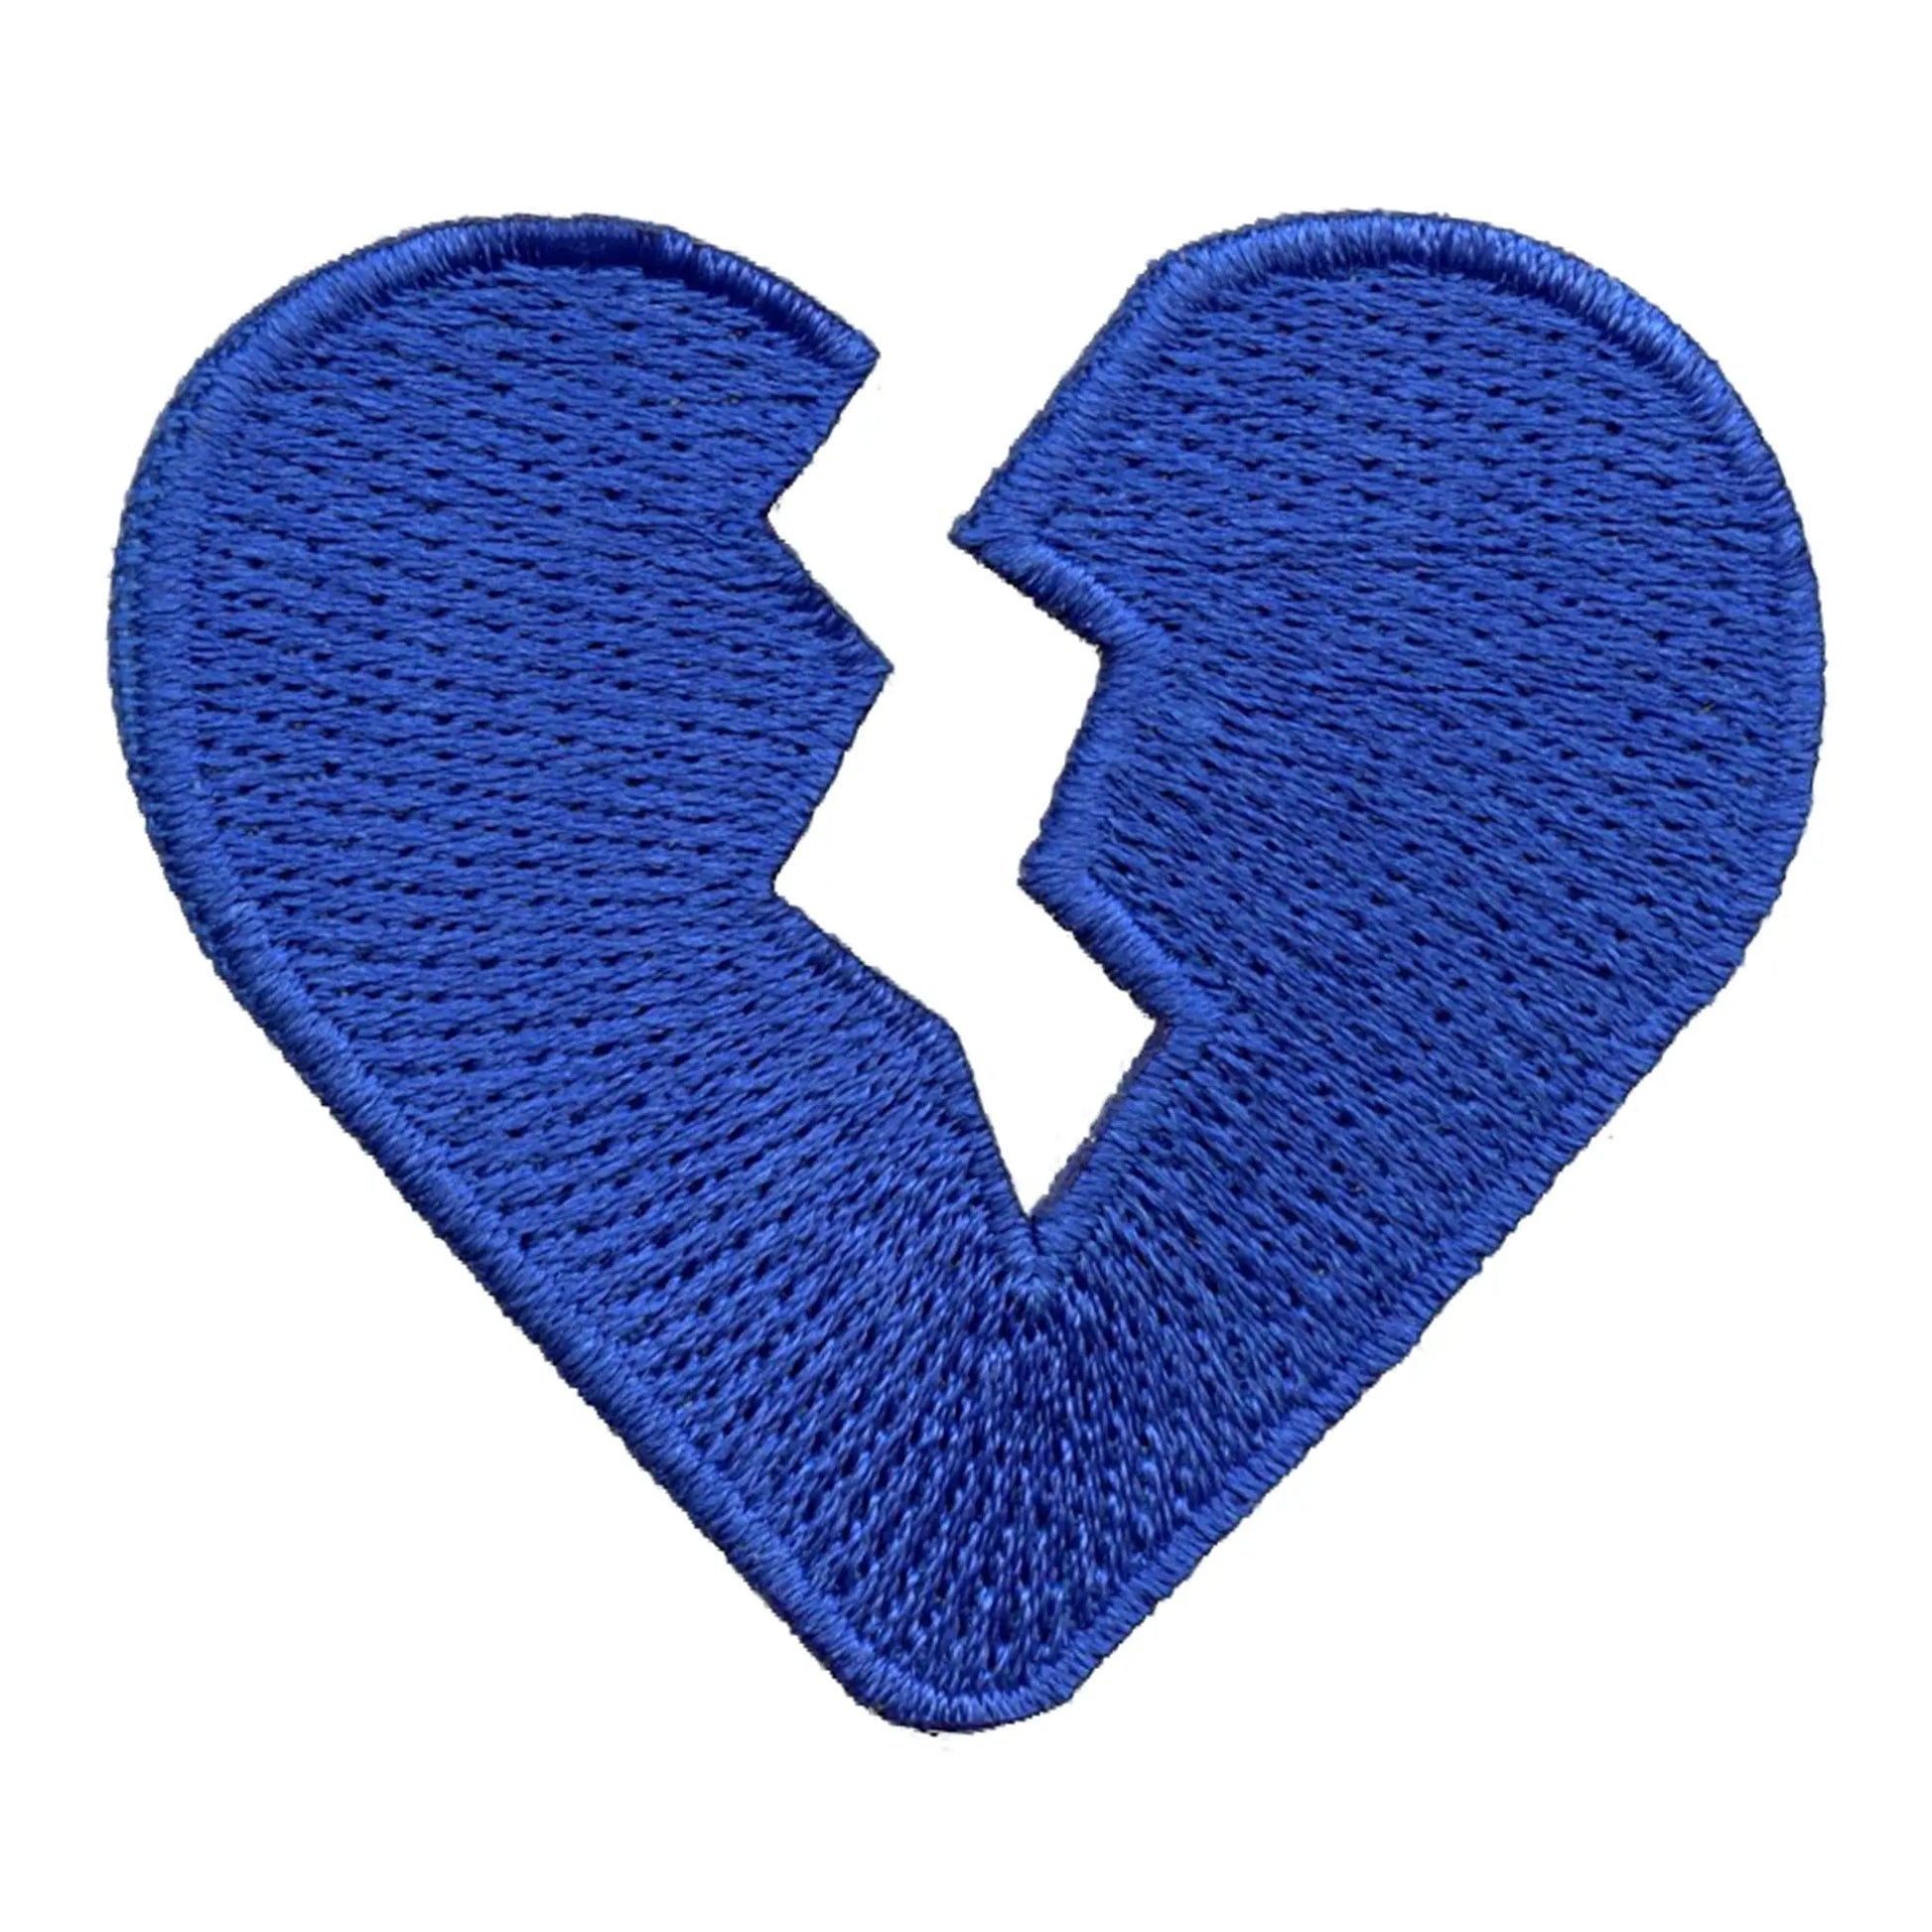 Small Broken Heart Embroidered Iron On Patch 